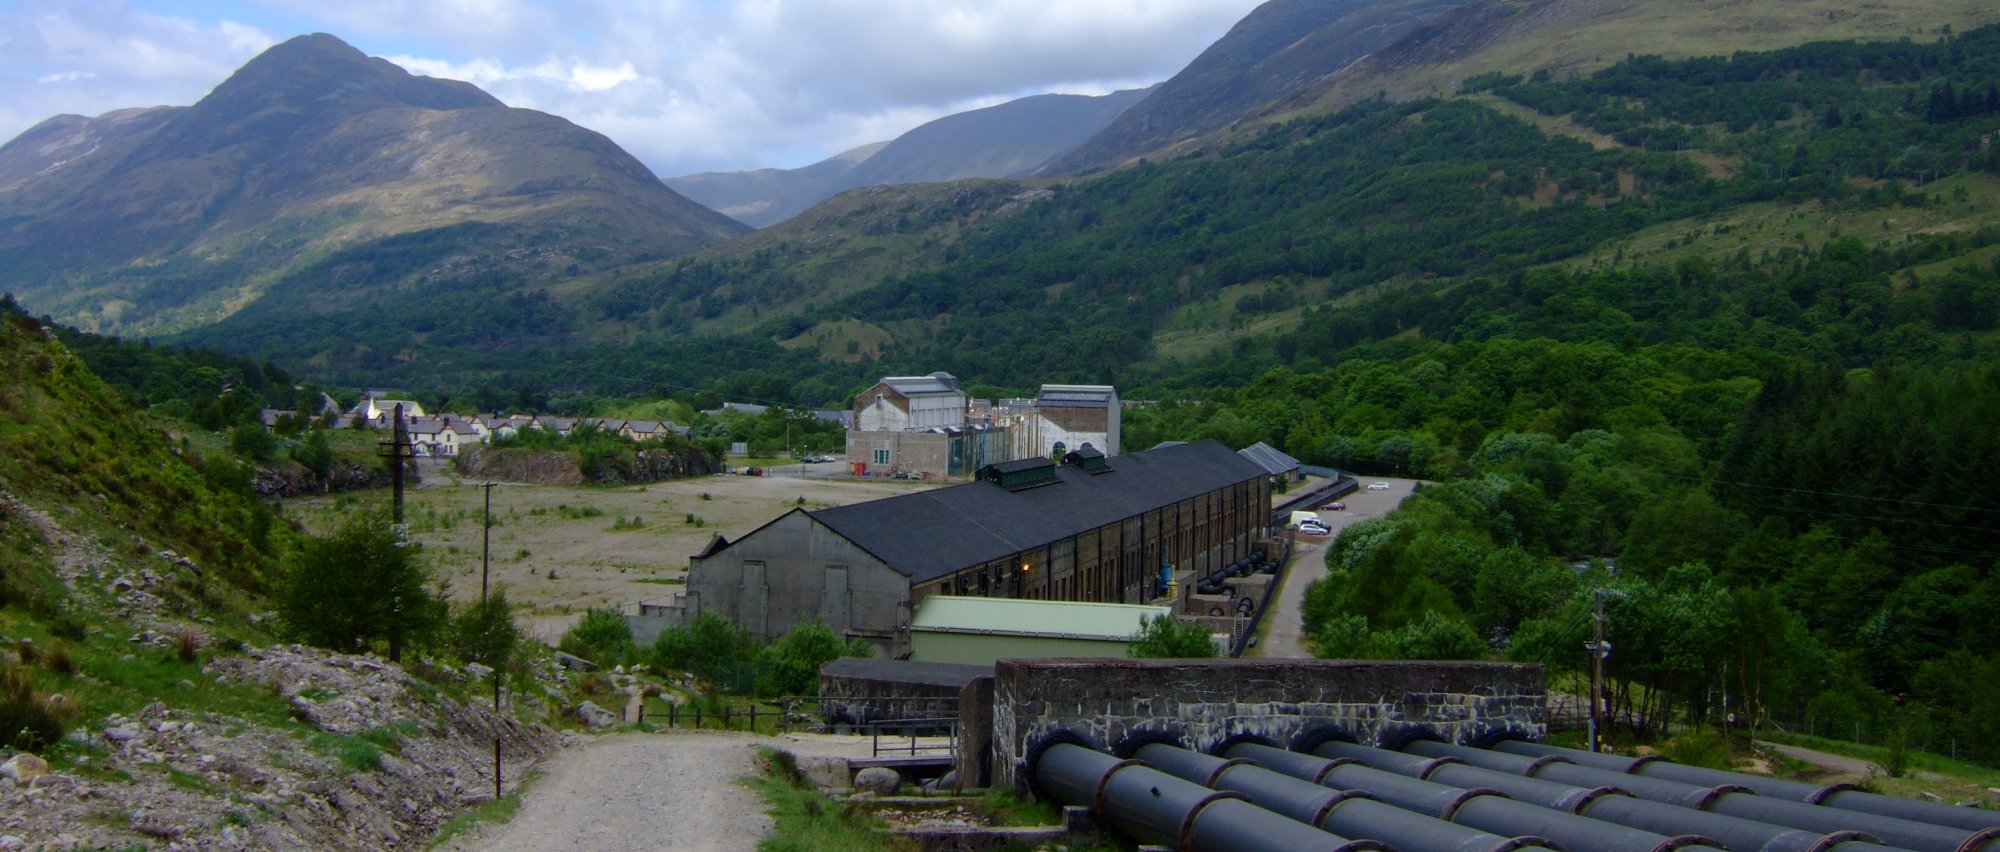 The industrial outskirts of Kinlochleven - not a pretty sight!